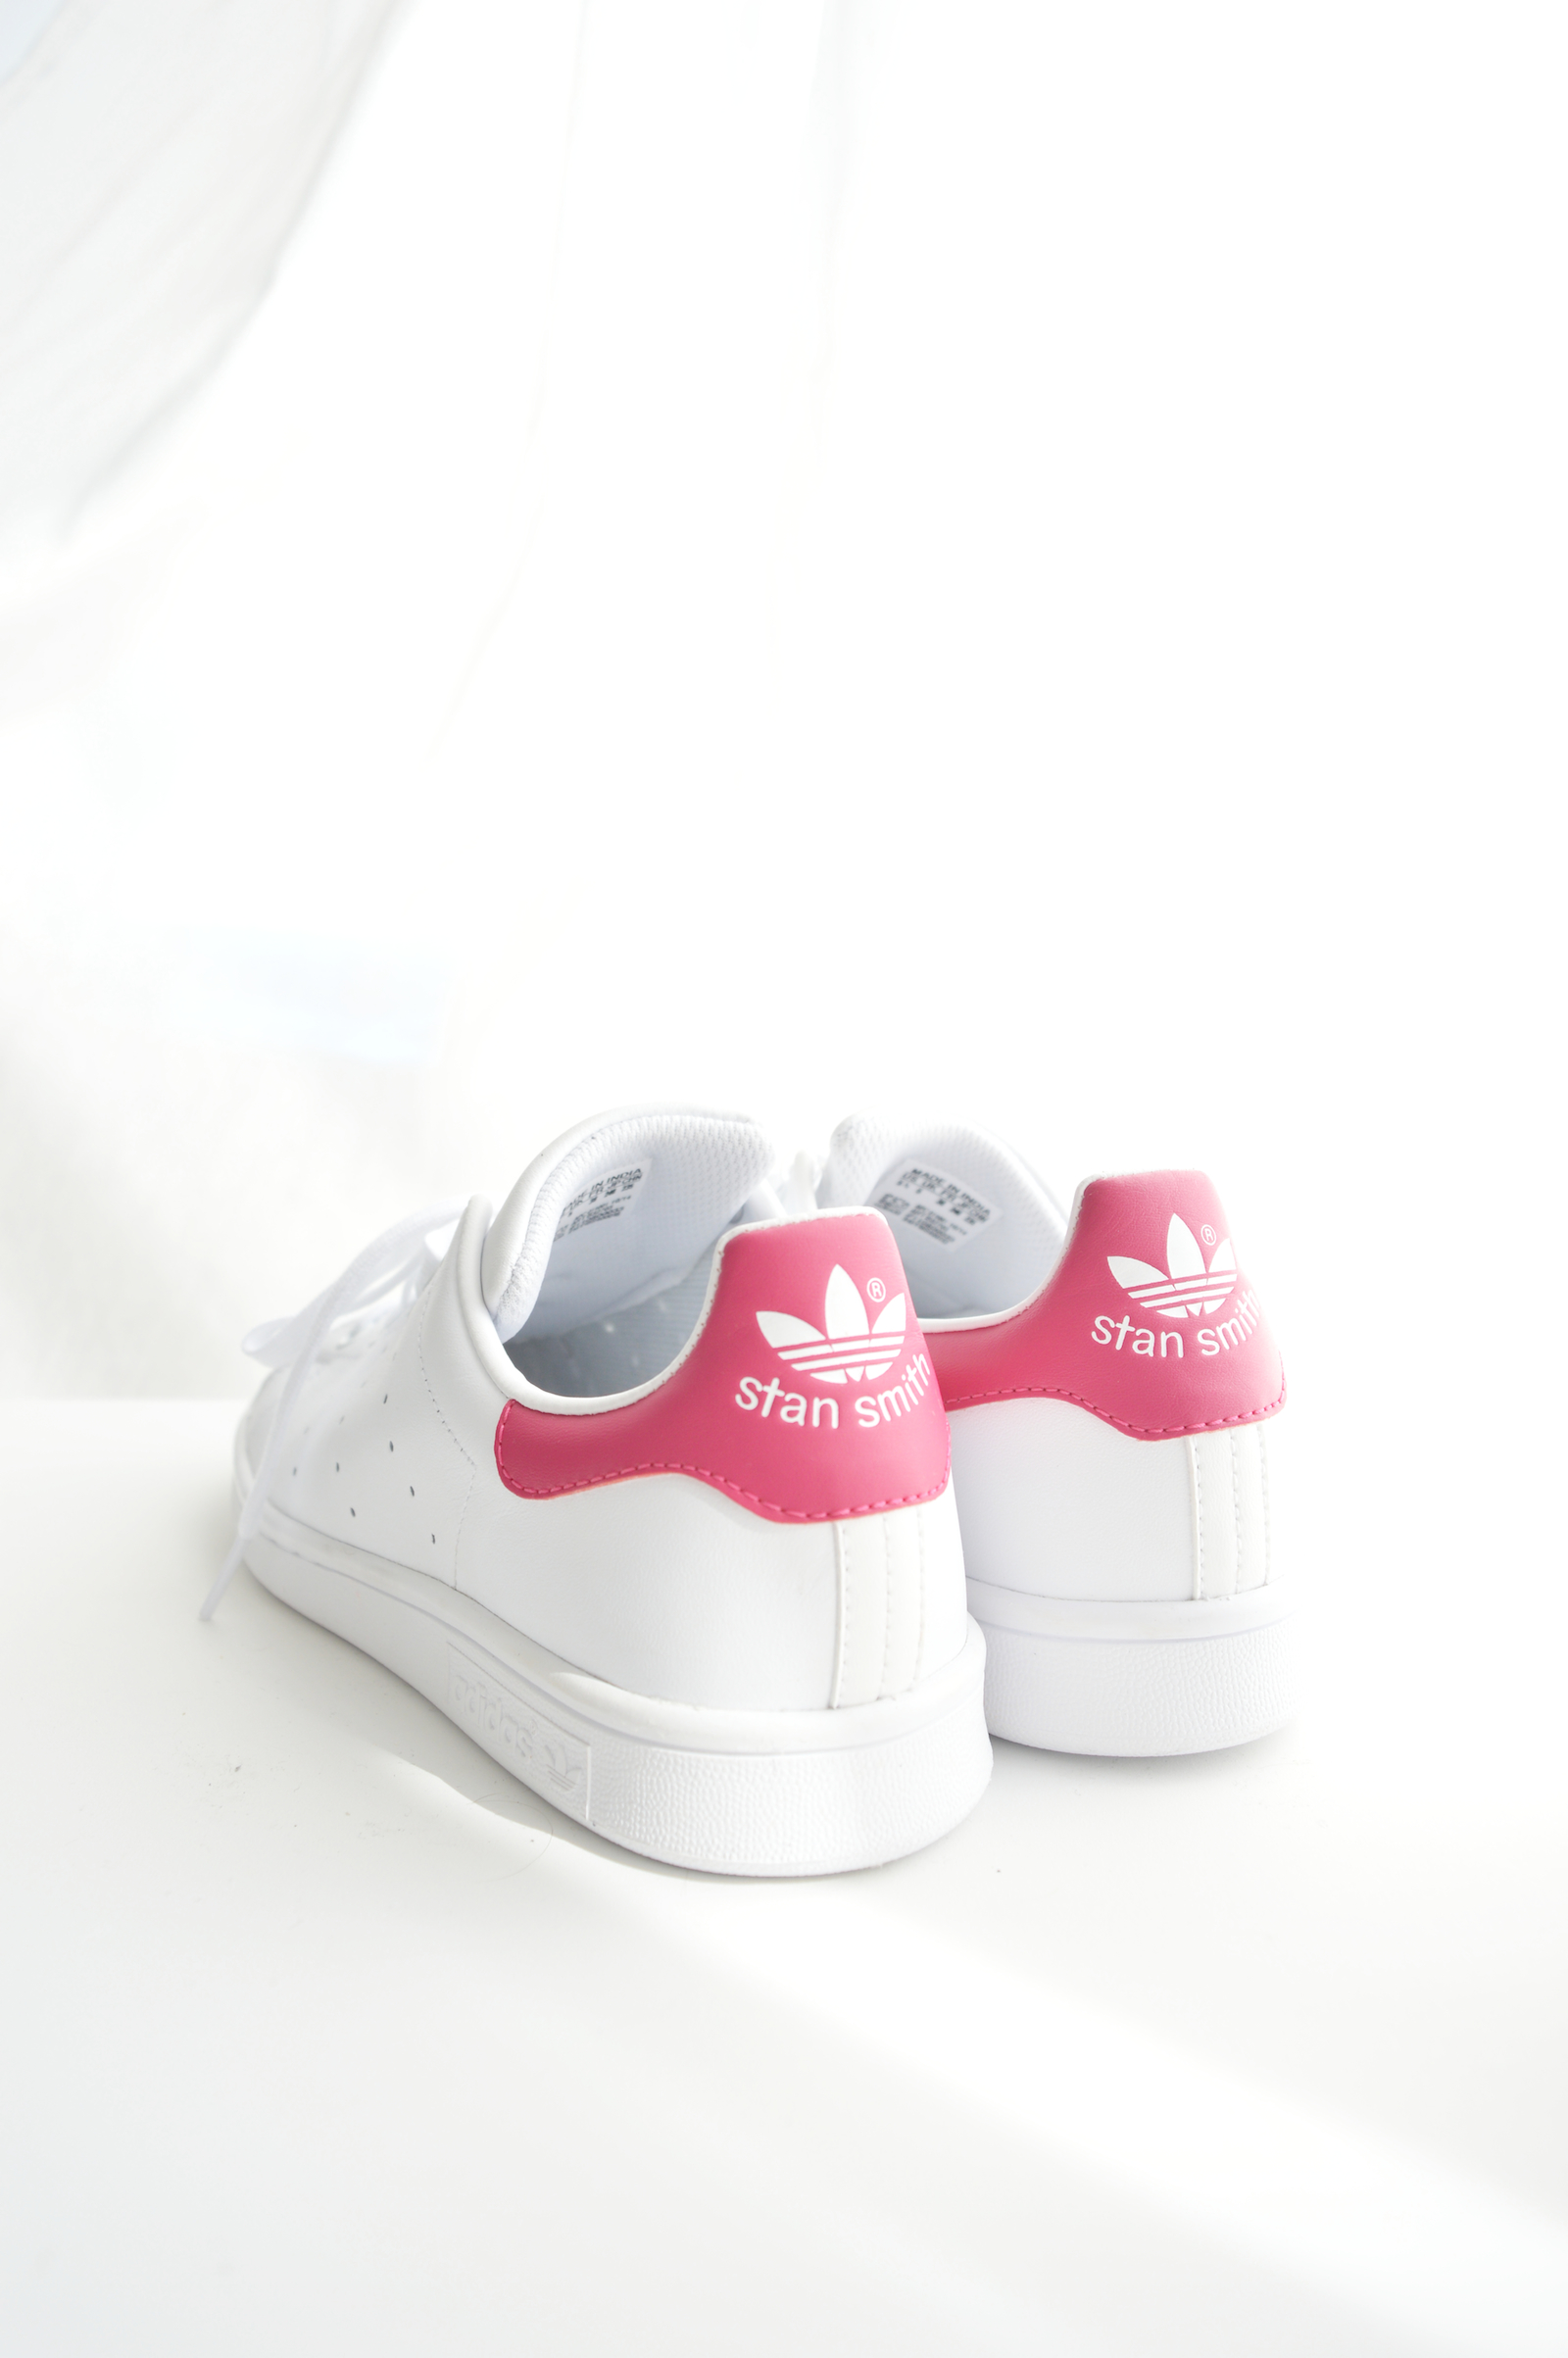 chaussure adidas stan smith femme pas cher